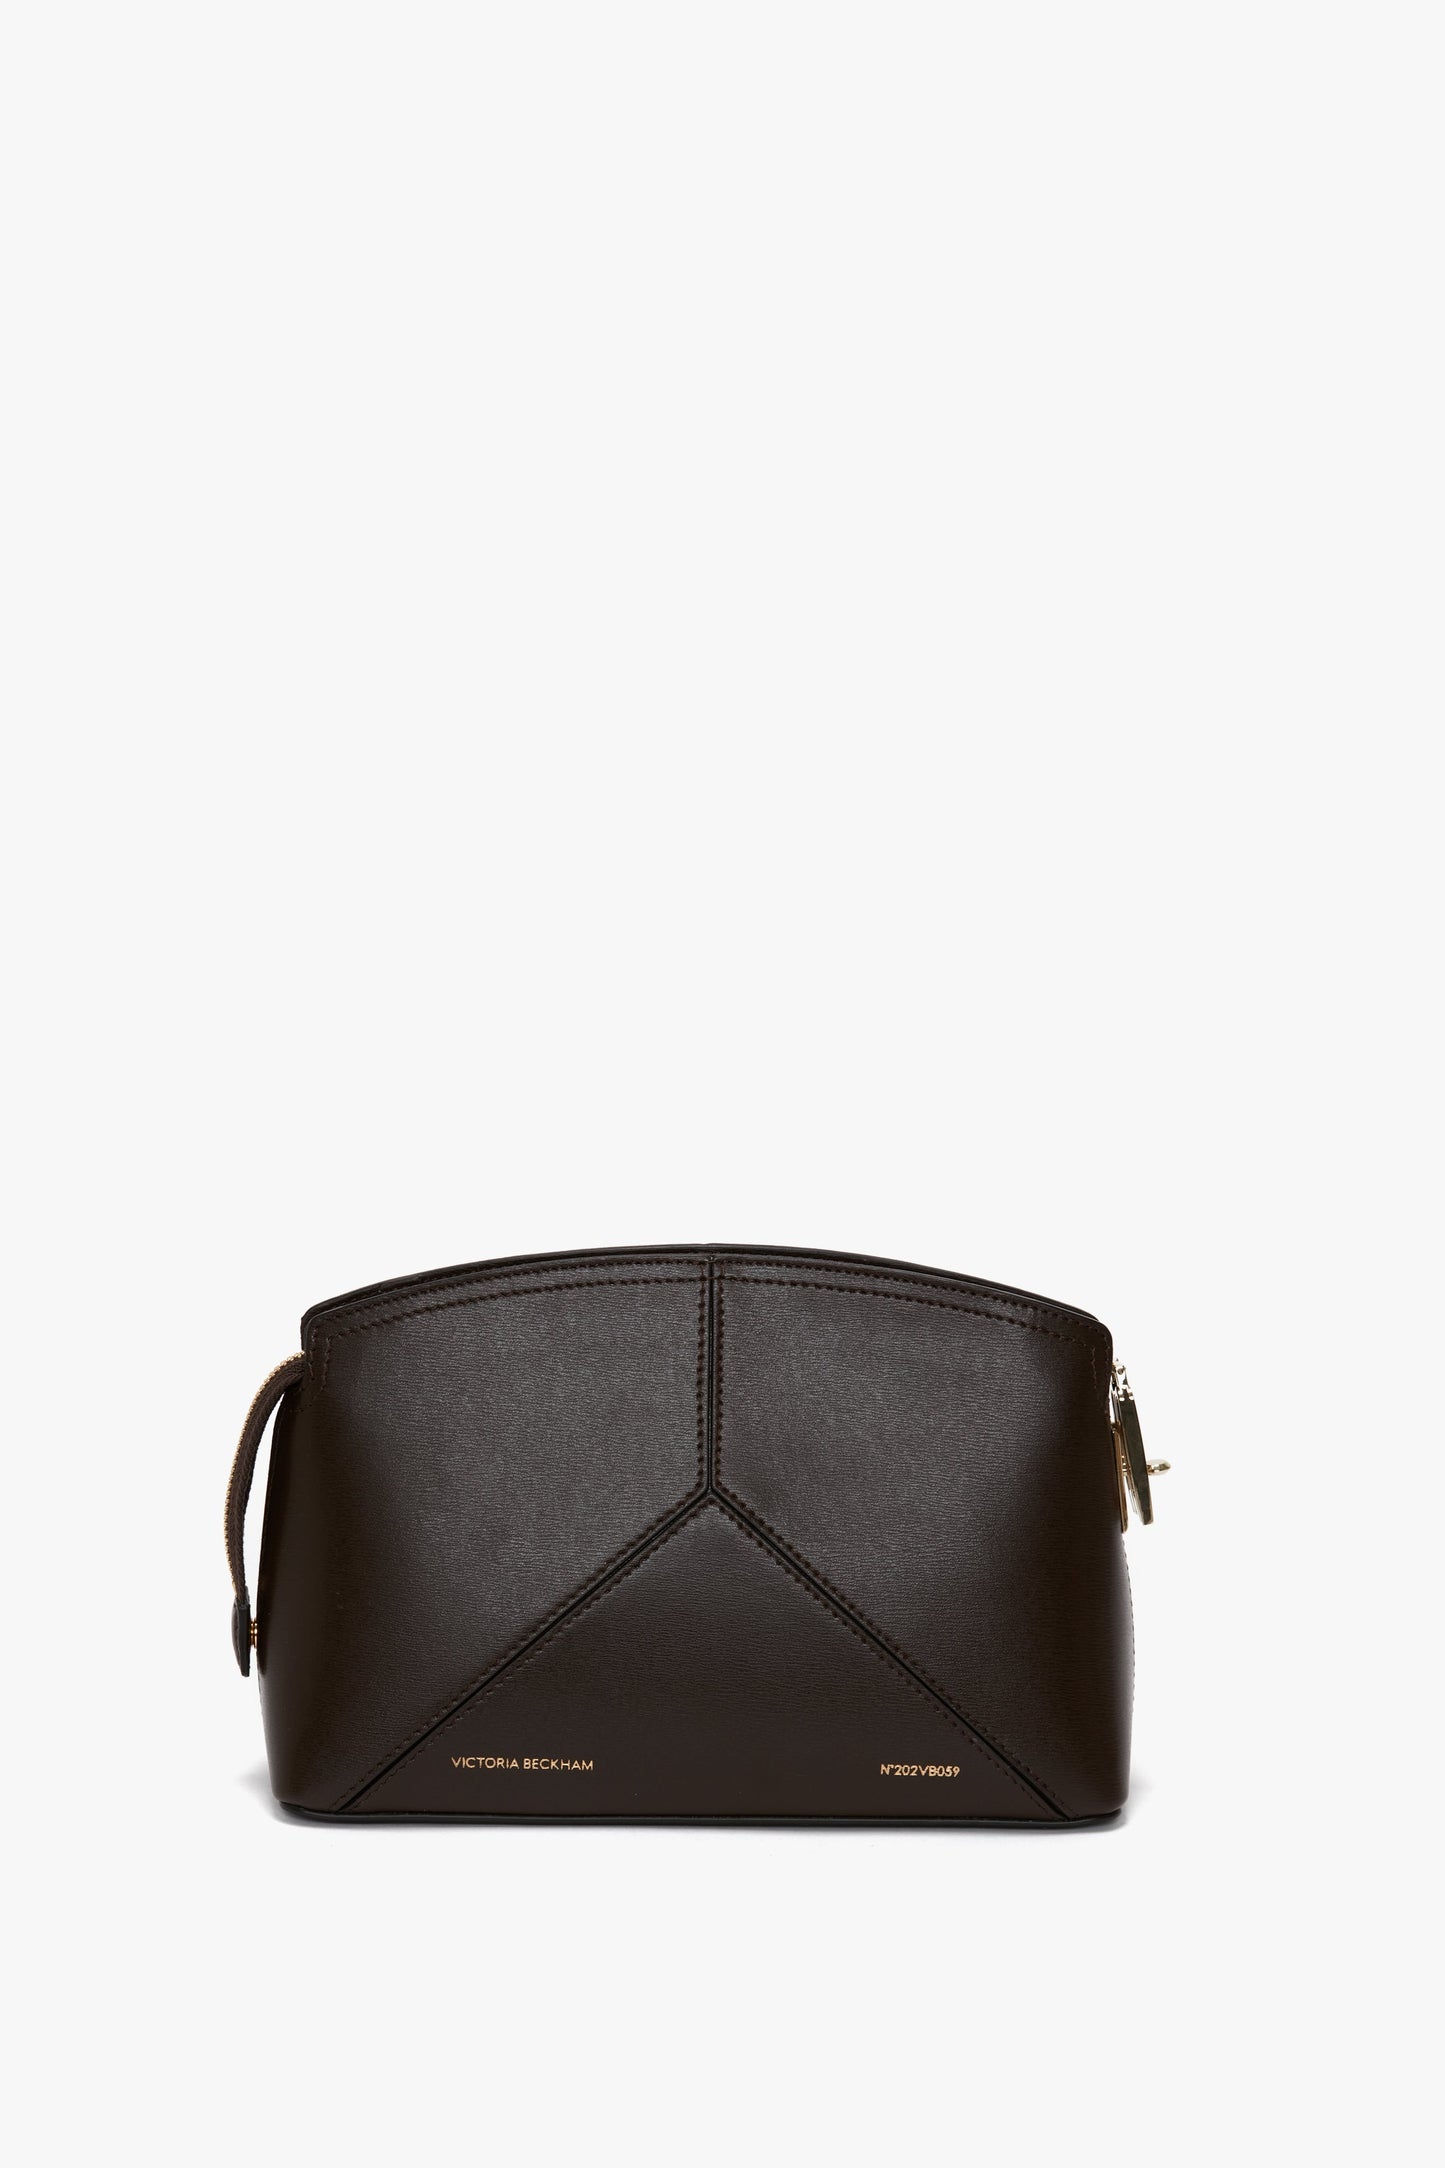 A brown leather crossbody bag with geometric stitching details, featuring a zip closure at the top and the signature V shape along with the words "Victoria Beckham Exclusive Victoria Crossbody Bag In Brown Leather" in gold at the bottom.